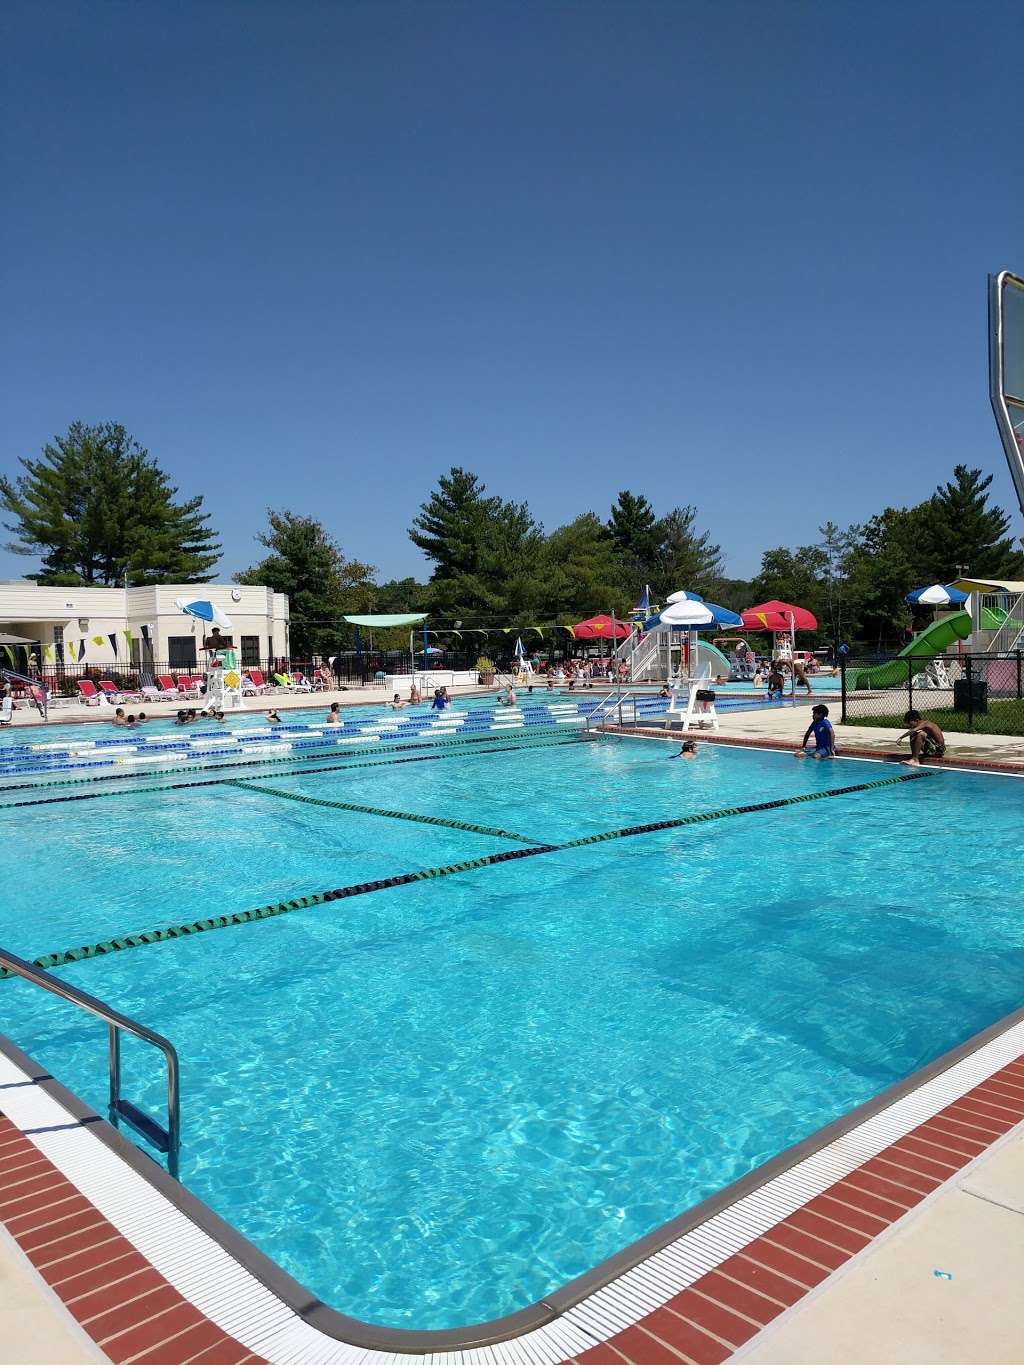 Ellen E Linson Swimming Pool | Parkway, 5211 Paint Branch Dr, College Park, MD 20740, USA | Phone: (301) 277-3719